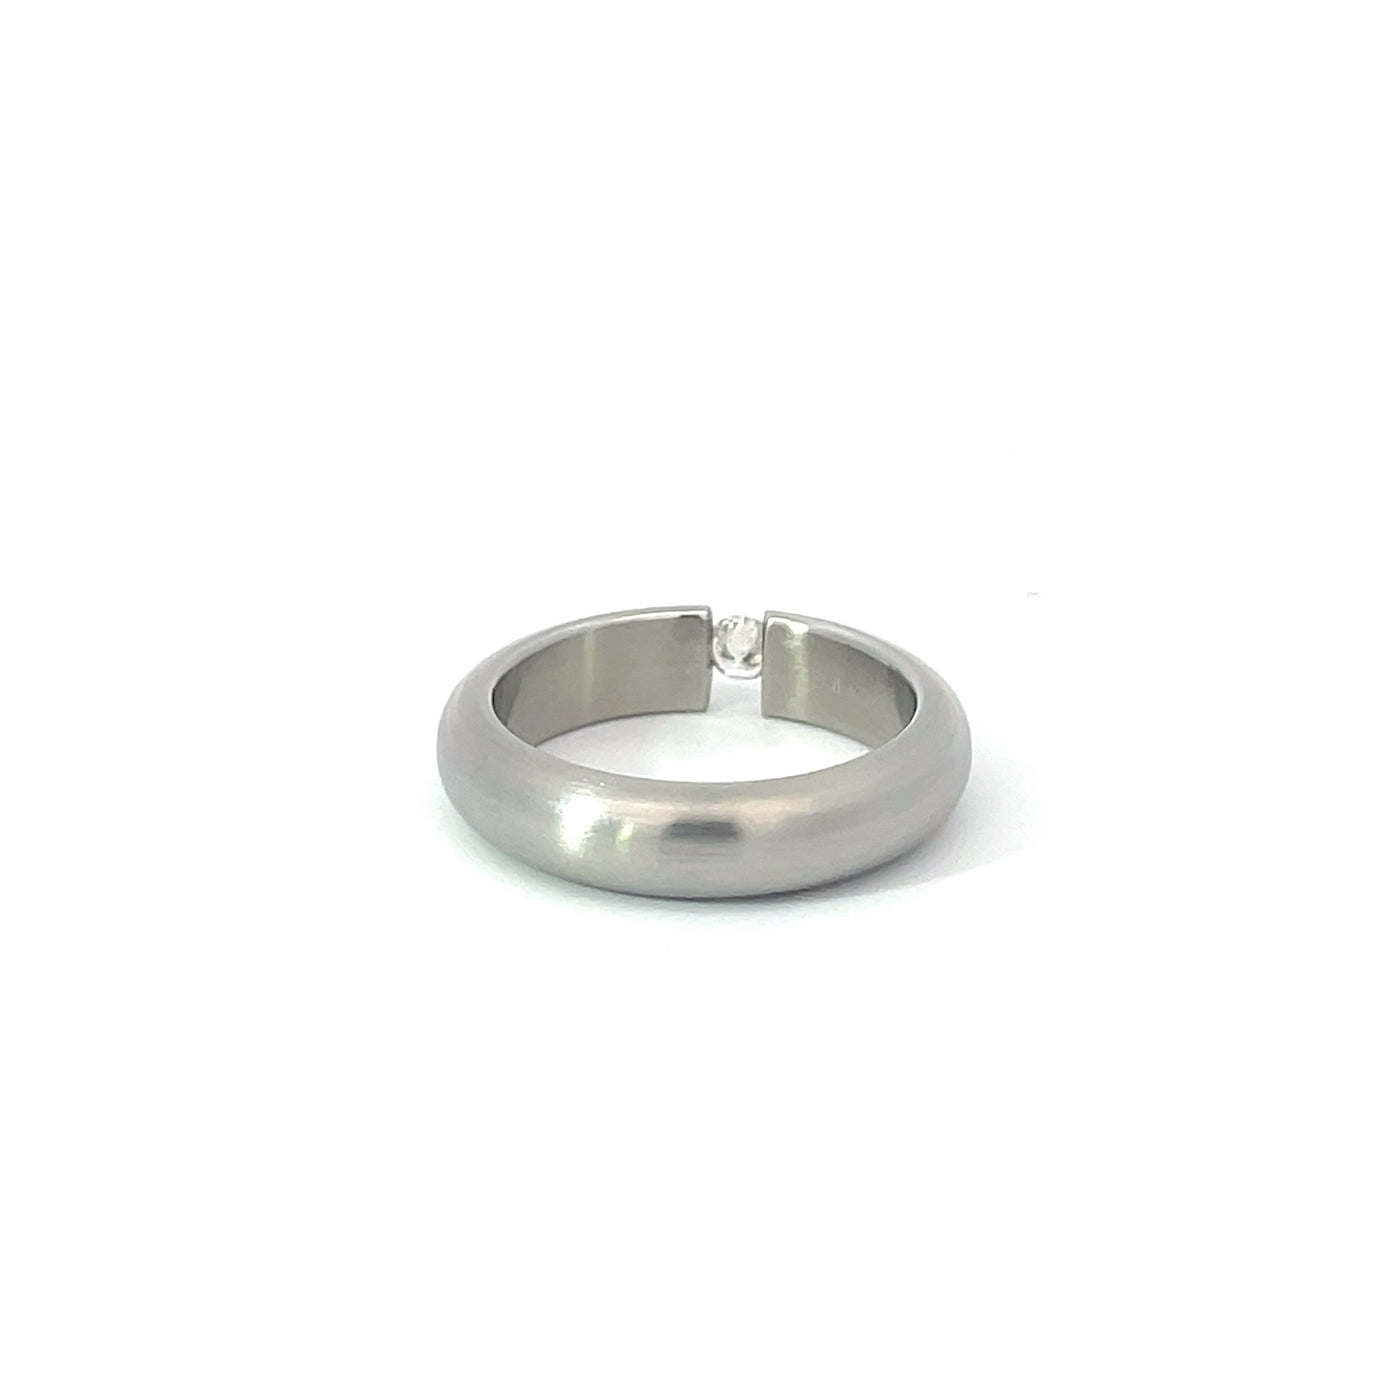 5mm Stainless Steel Tension Set Diamond Ring - Size M 1/2